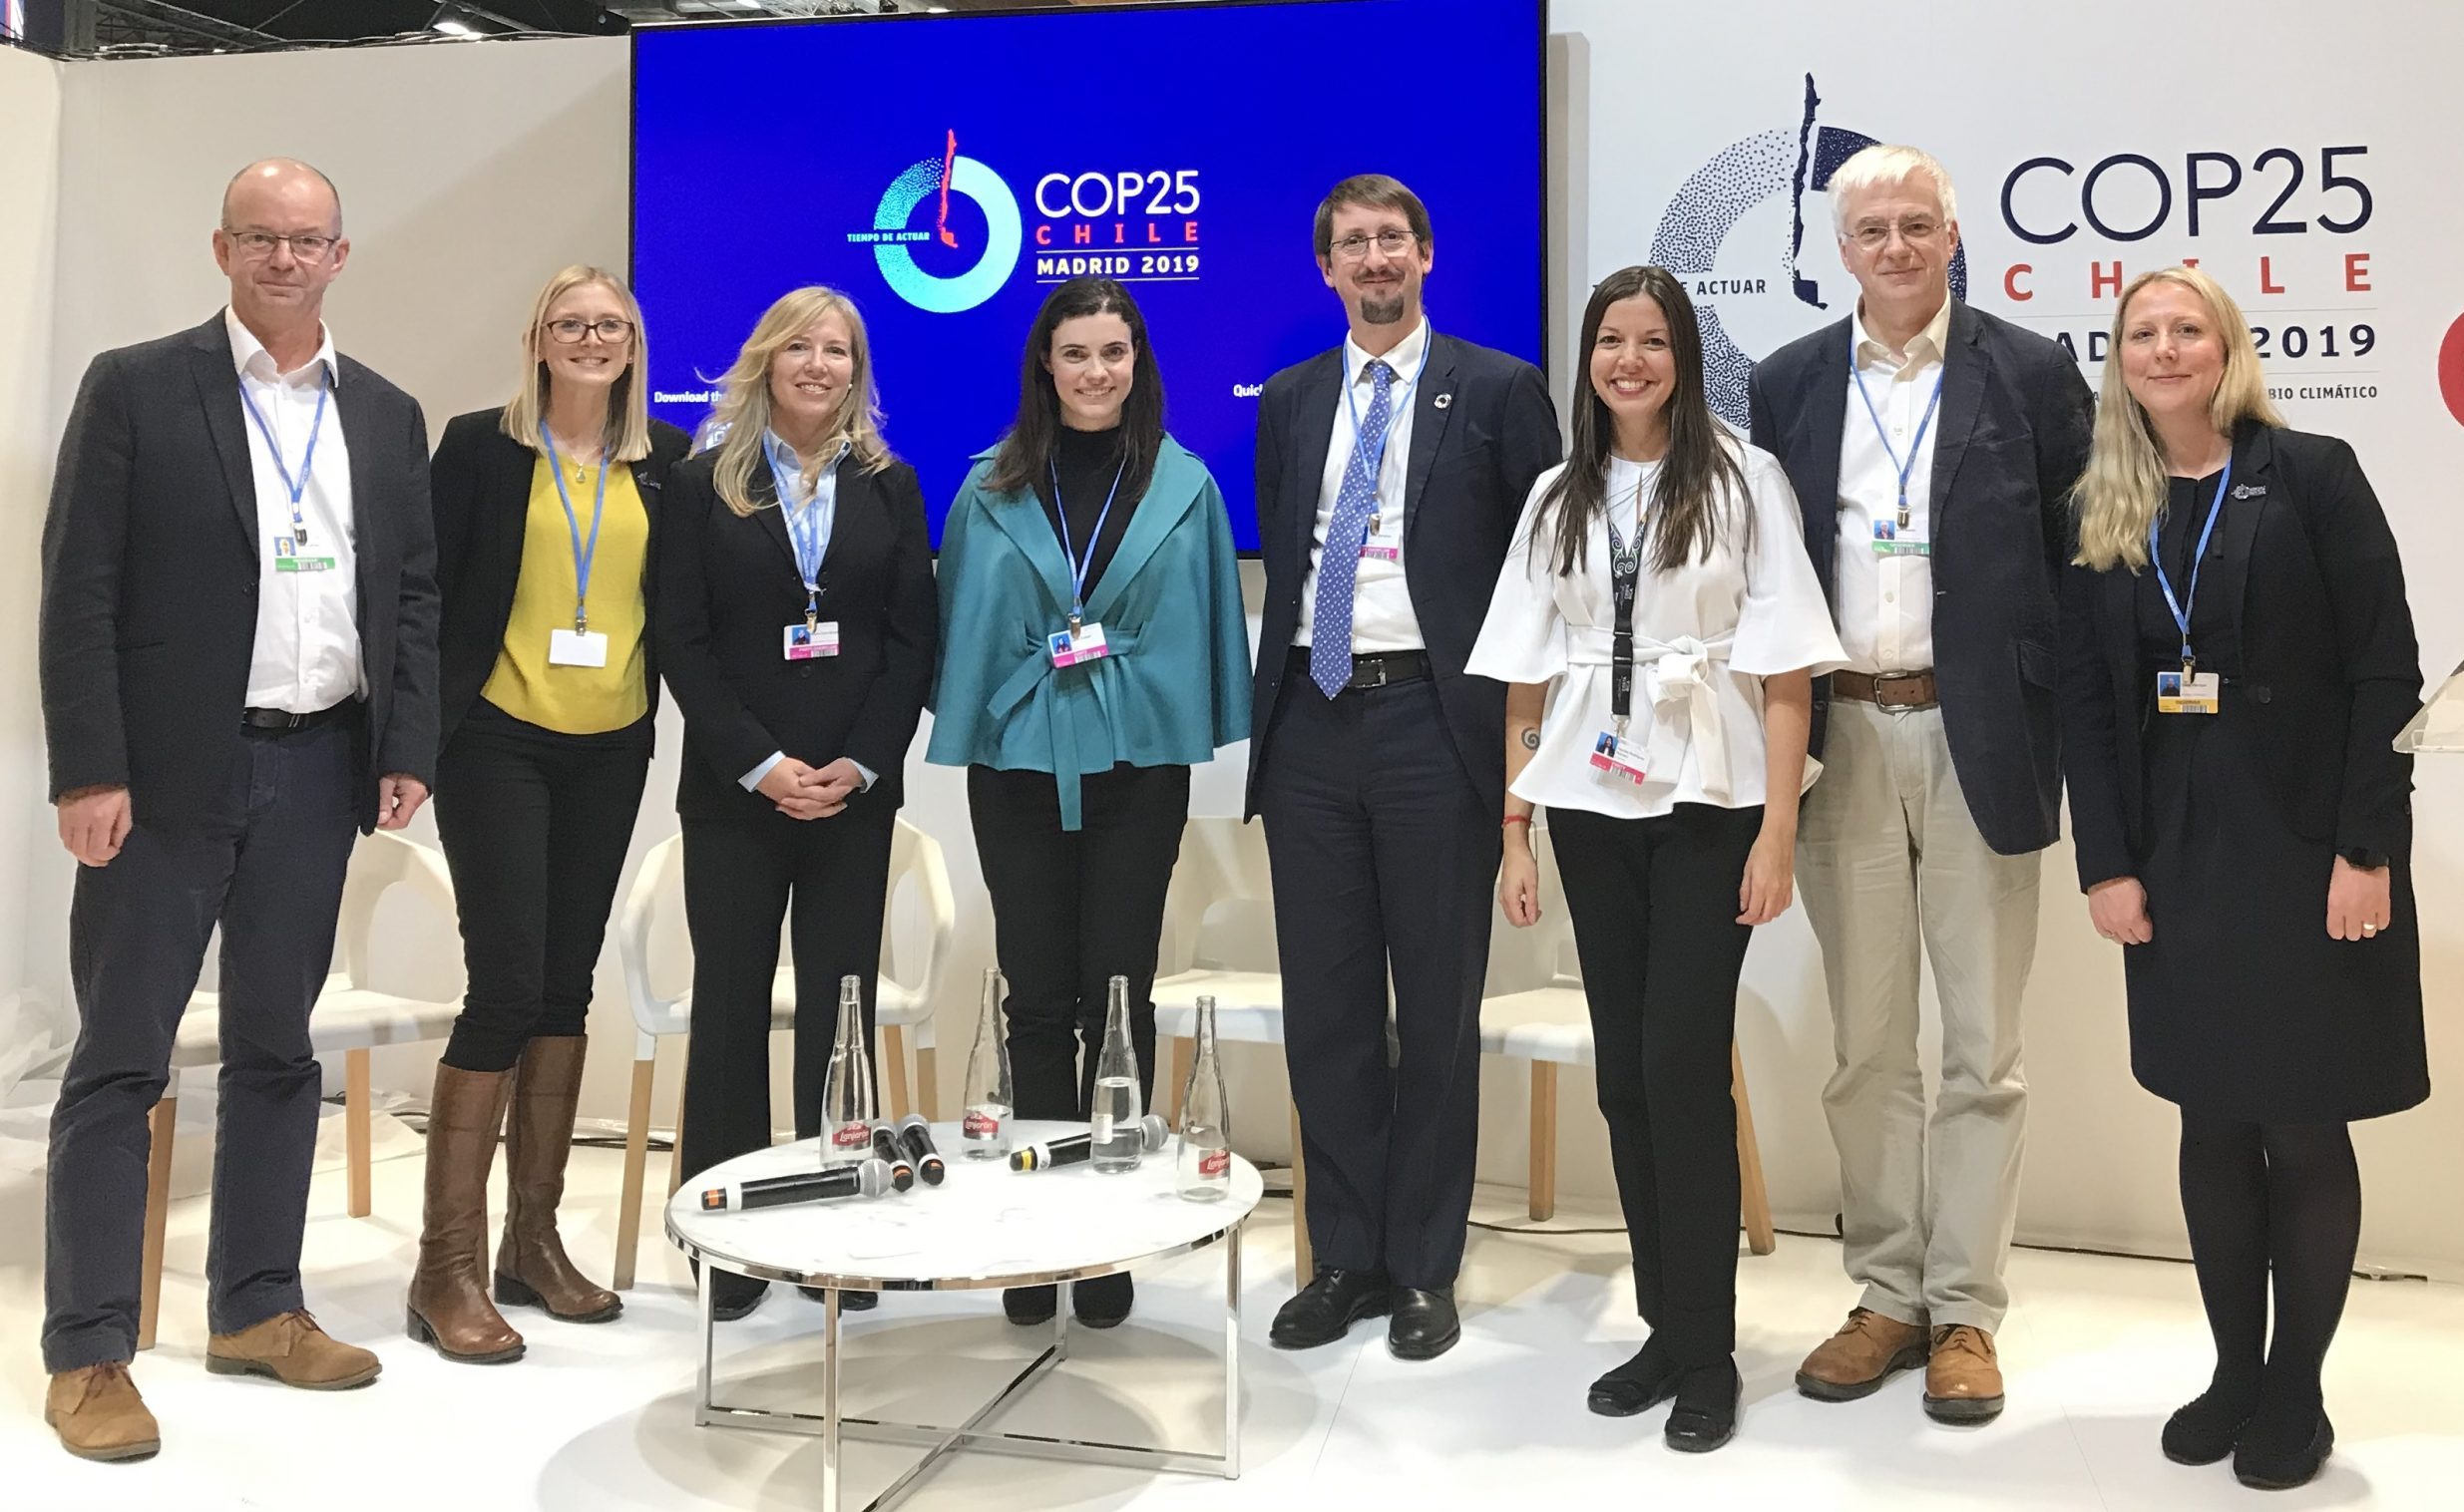 The Partners at COP25